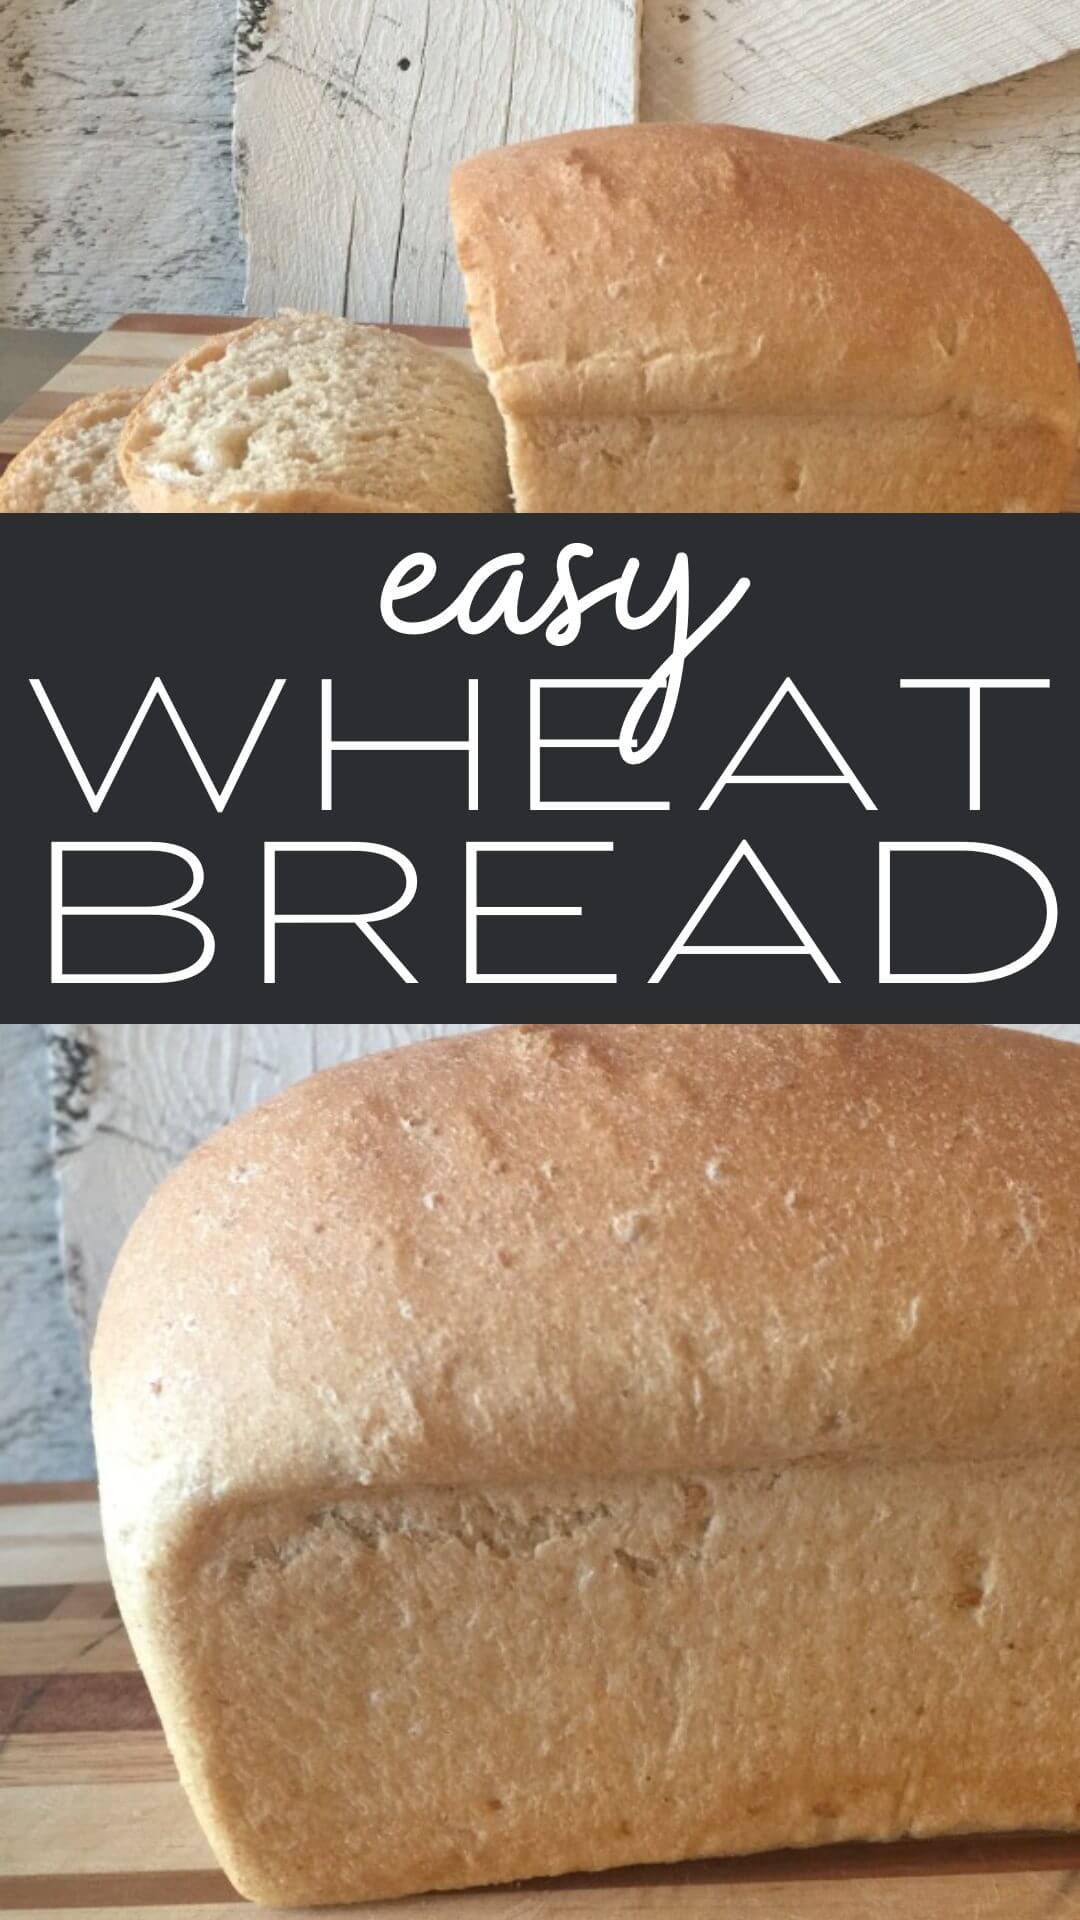 This is the only and best wheat bread recipe you will ever need. It is light and fluffy.This recipe is easy to follow with full instructions.